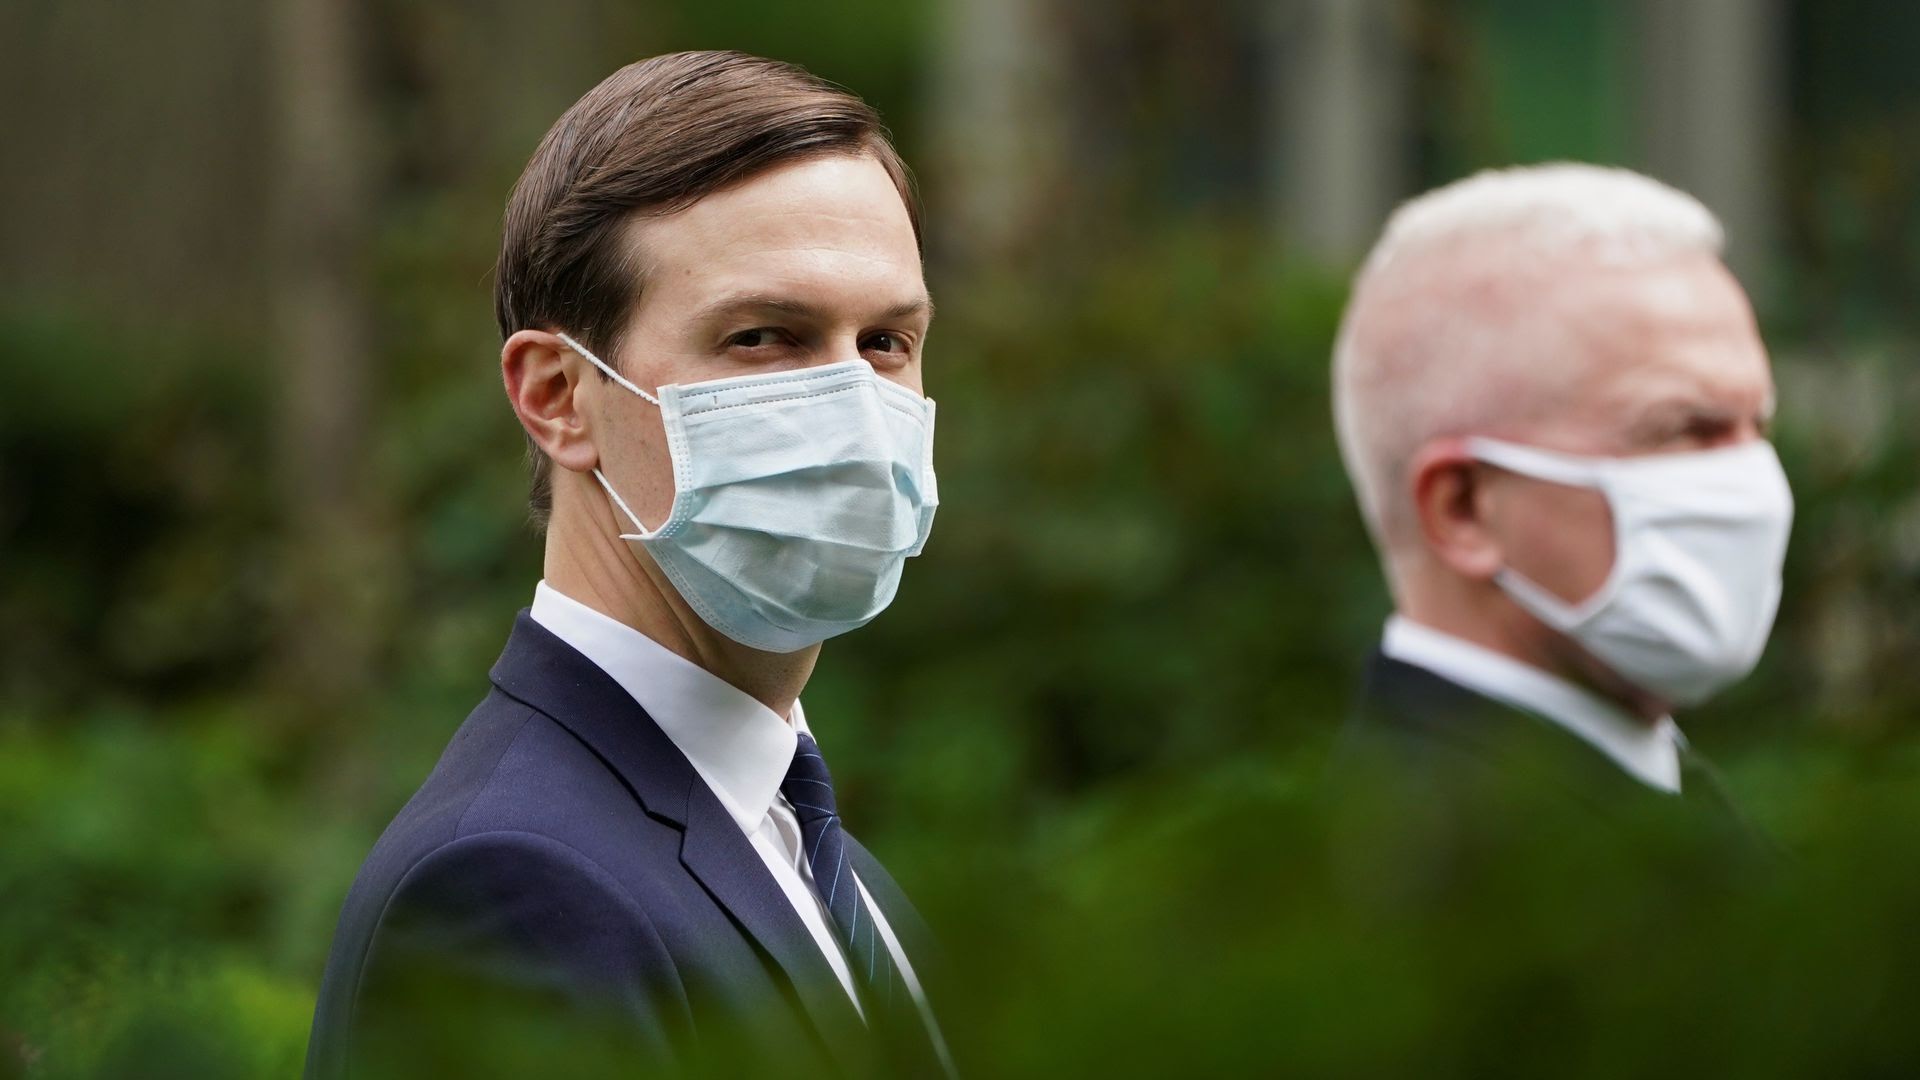 Jared Kushner and Adm. Brett Giroir, the federal official overseeing testing, wear masks at the White House during President Trump's news conference this afternoon. Photo: Kevin Lamarque/Reuters